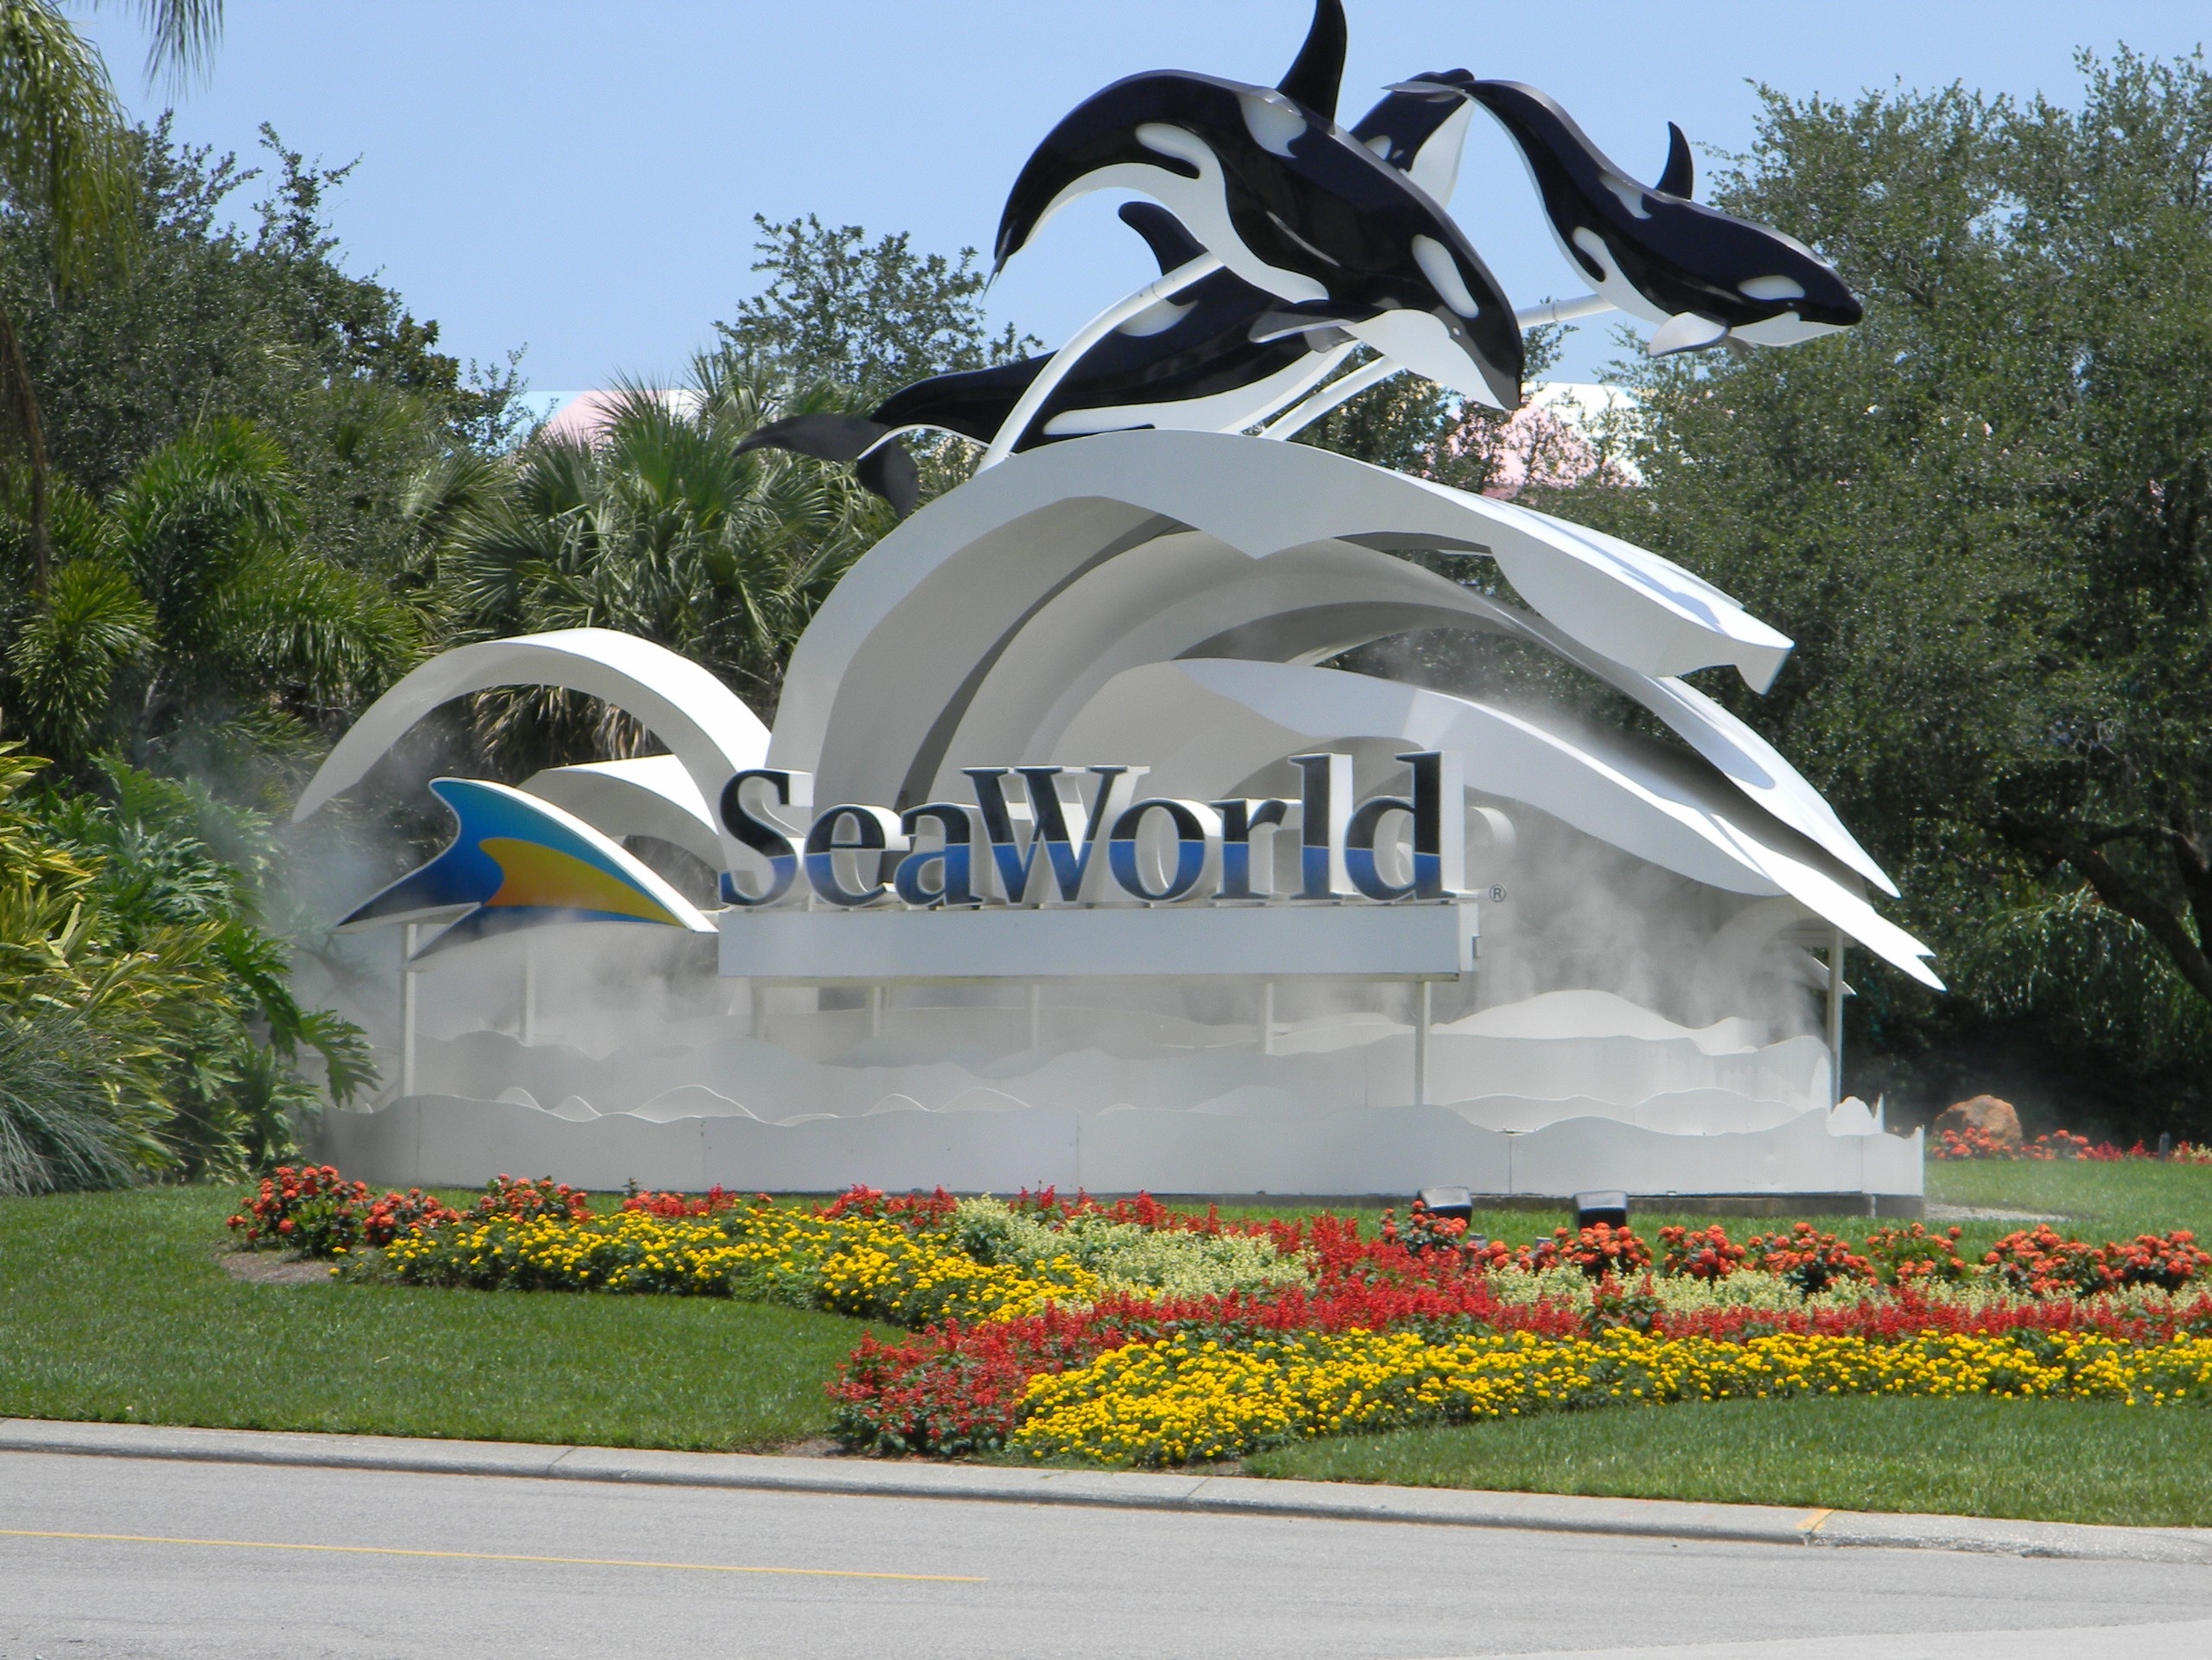 Cocoa Beach Visitor Center - Purchase Discounted Sea World Tickets in Cocoa Beach – Avoid Lines – $84 each Adults & Children